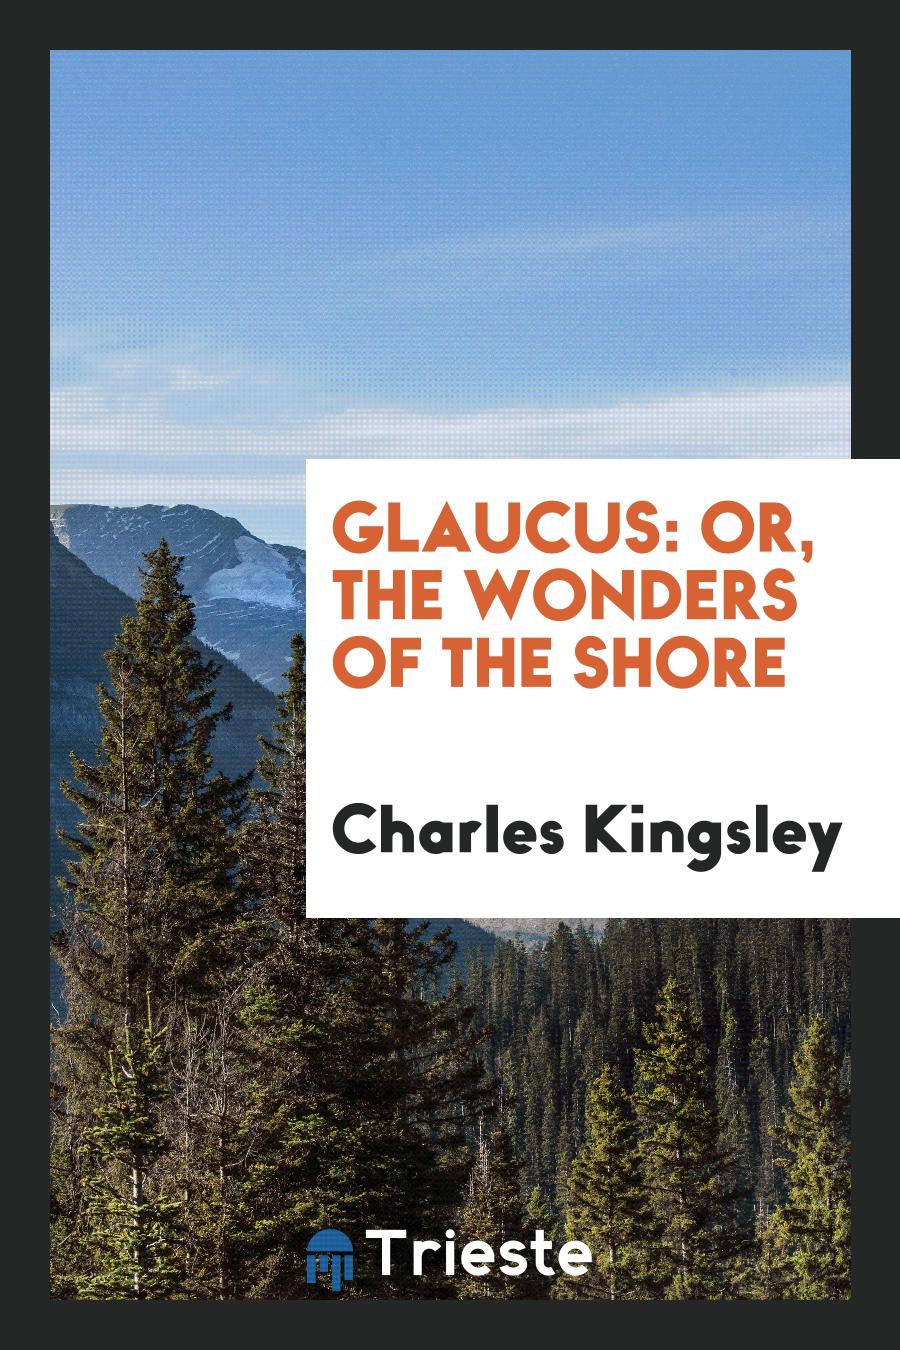 Charles Kingsley - Glaucus: or, The wonders of the shore